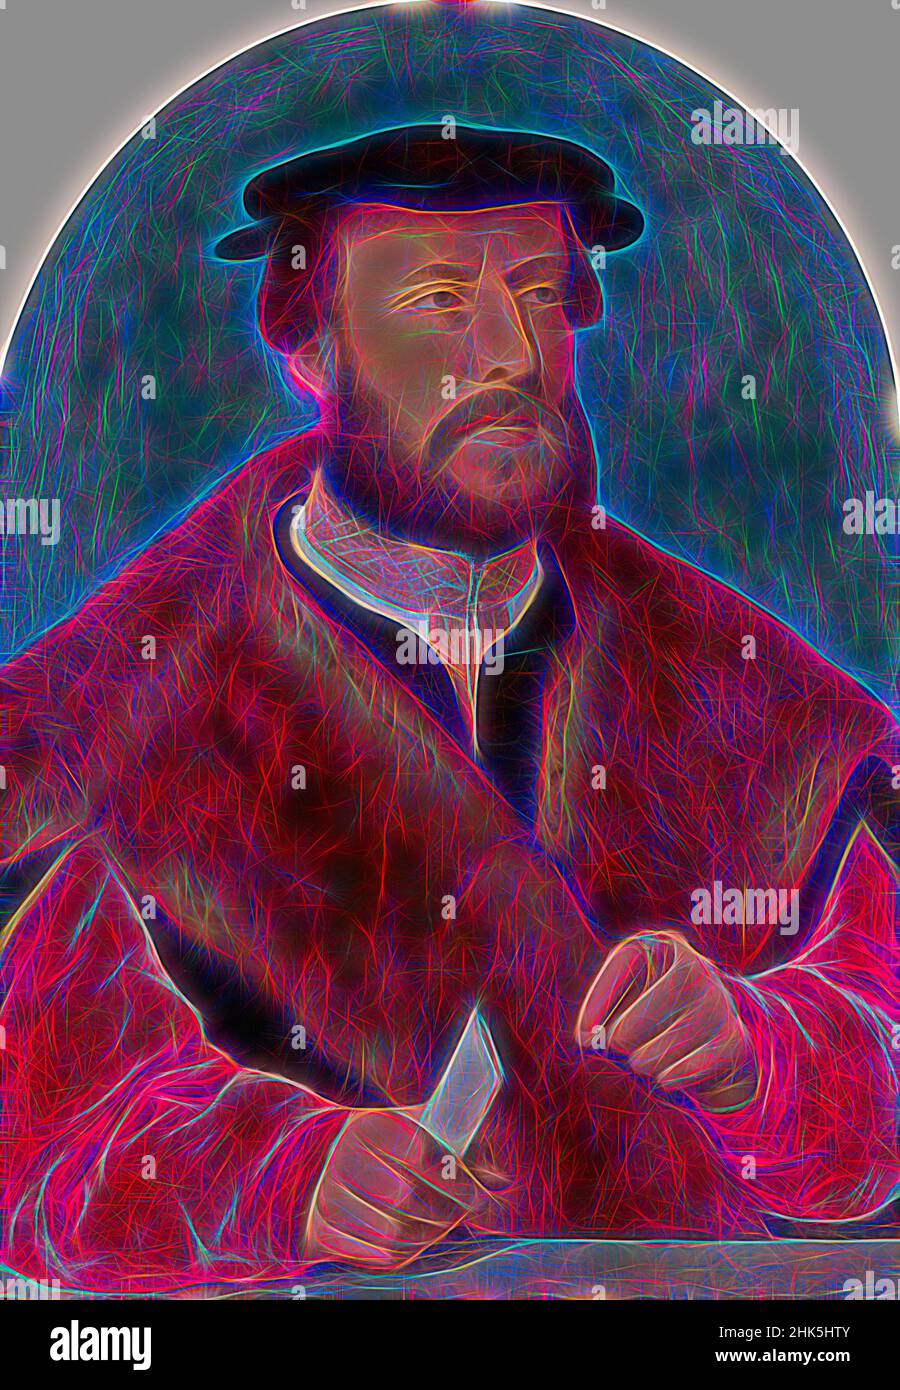 Inspired by Portrait of Jakob Omphalius 1500-1567, Bartholomäus Bruyn de Oude, 1538 - 1539, Reimagined by Artotop. Classic art reinvented with a modern twist. Design of warm cheerful glowing of brightness and light ray radiance. Photography inspired by surrealism and futurism, embracing dynamic energy of modern technology, movement, speed and revolutionize culture Stock Photo